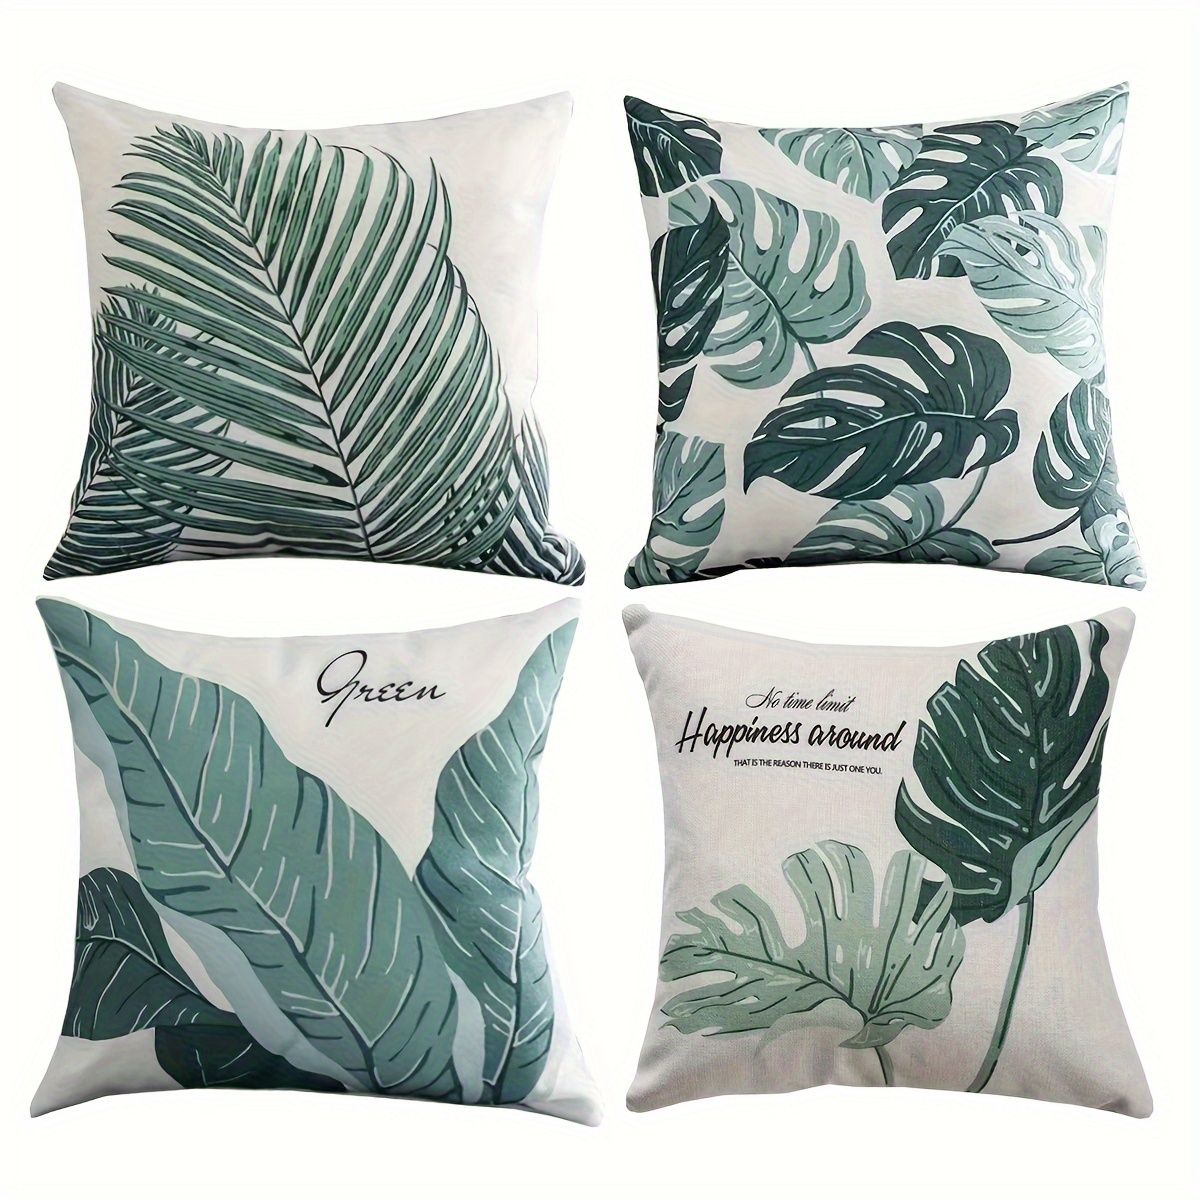 

4pcs, Tropical Green Plant Series Nordic Fresh Printed Throw Pillow Cover Outdoor Waterproof Plantain Leaf Pillowcase For Patio Tent Balcony Couch Sofa 17.7x17.7 Inch(without Pillow Core, Cover Only)